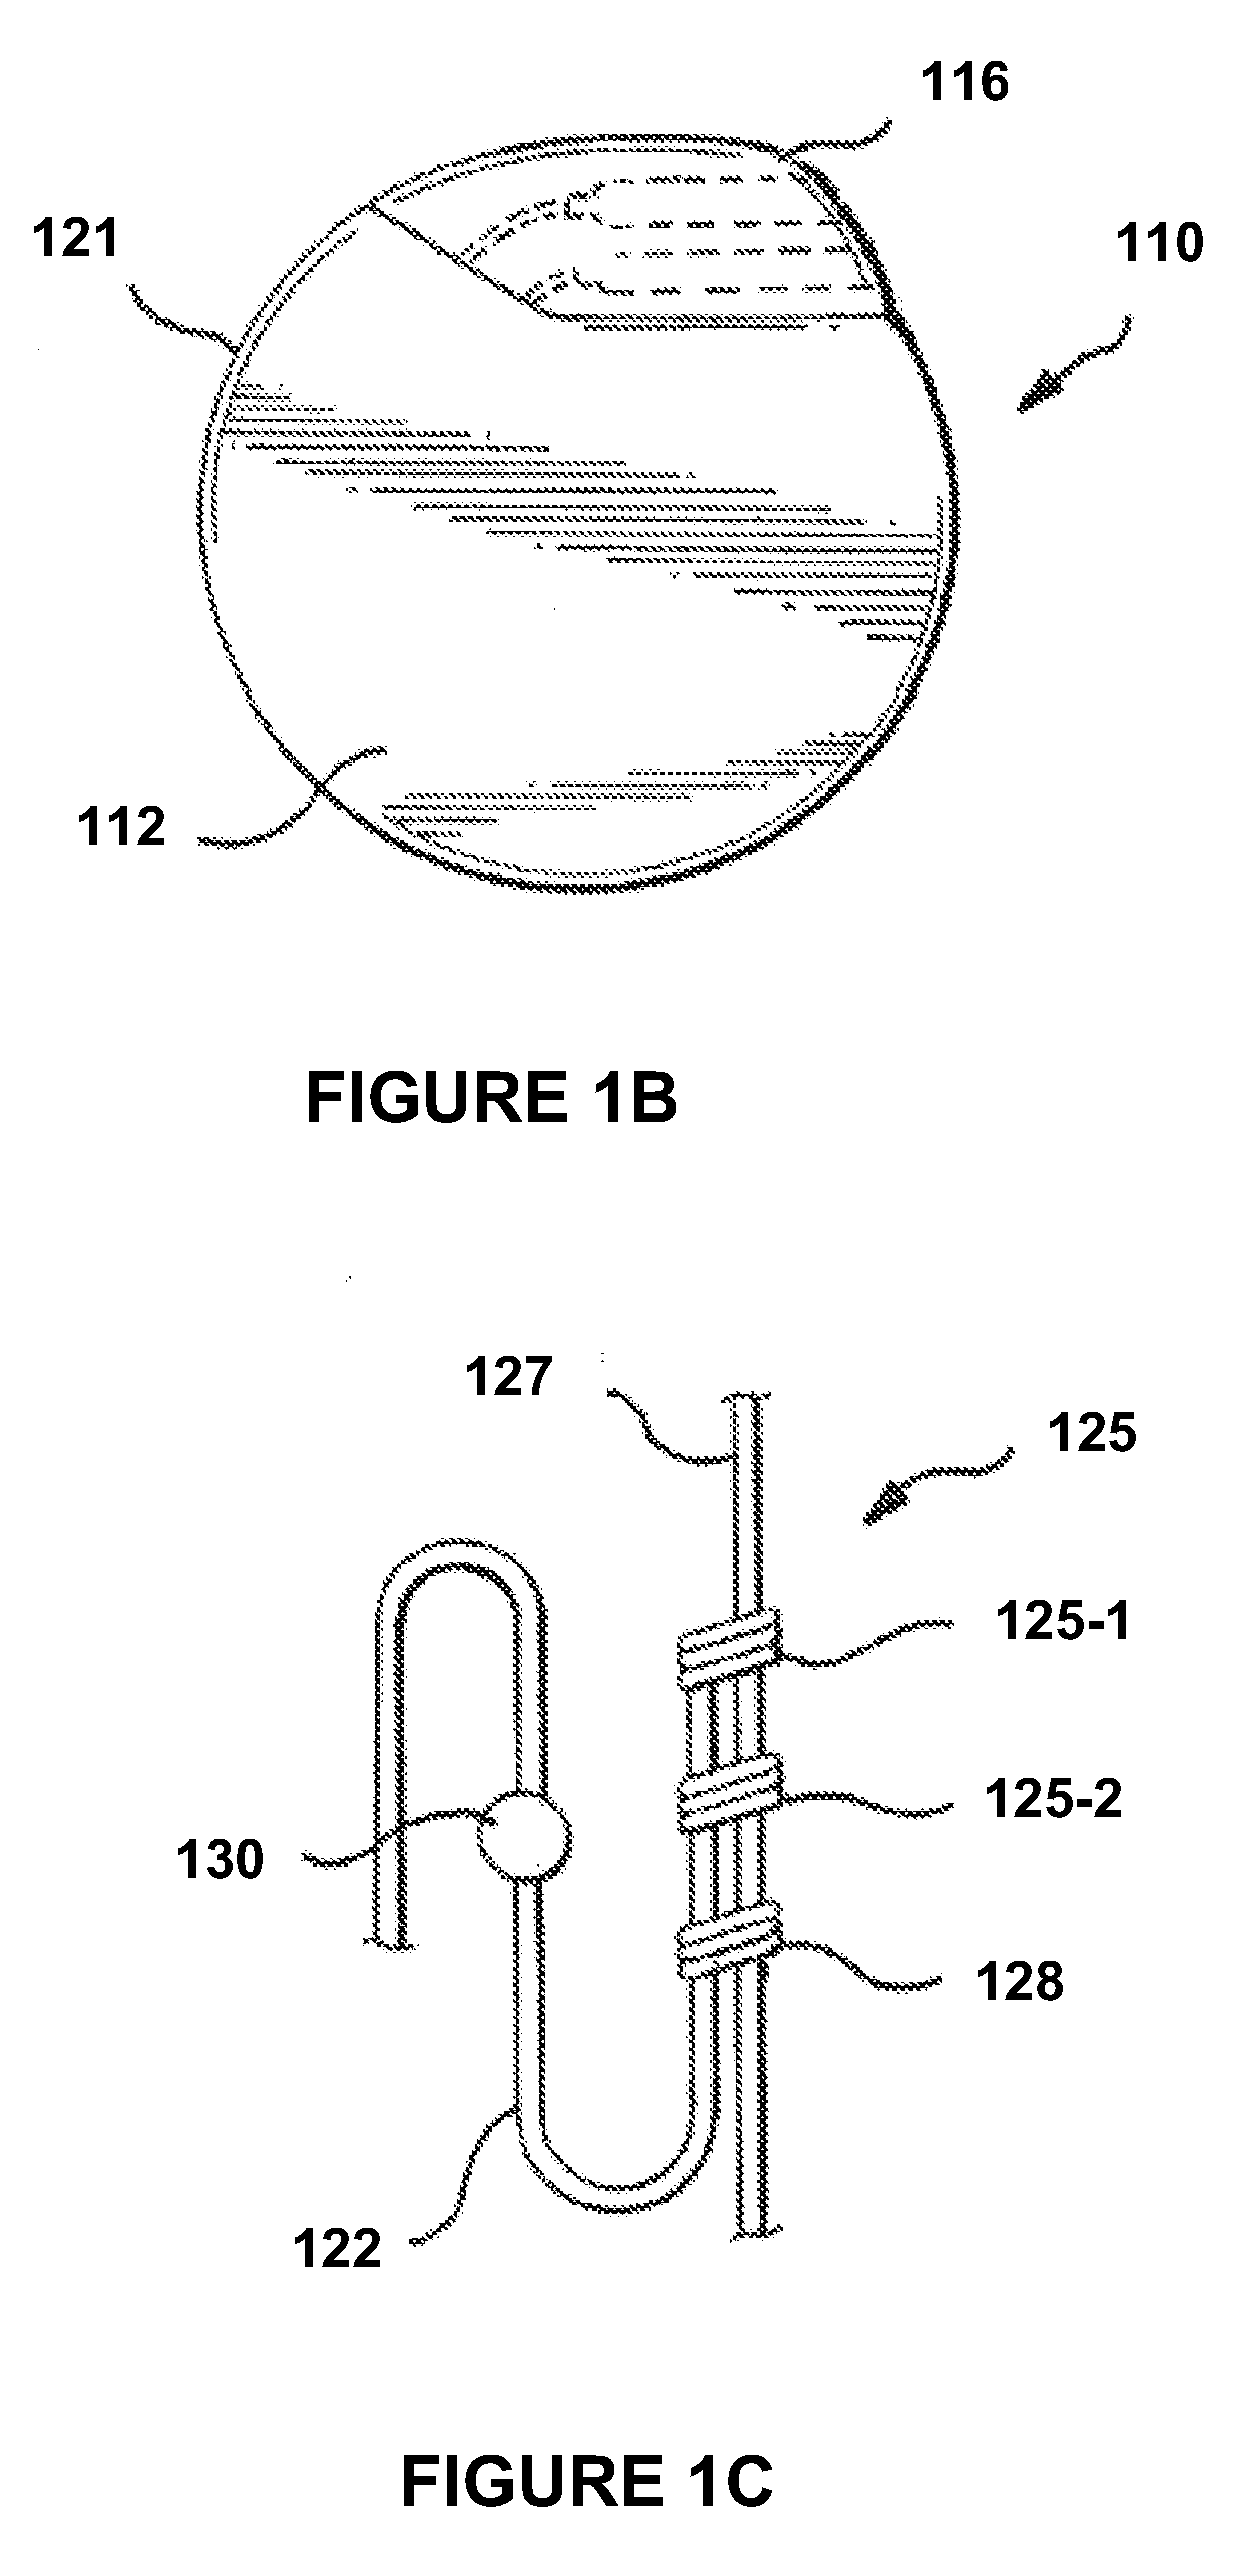 Method, Apparatus and System for Bipolar Charge Utilization During Stimulation by an Implantable Medical Device